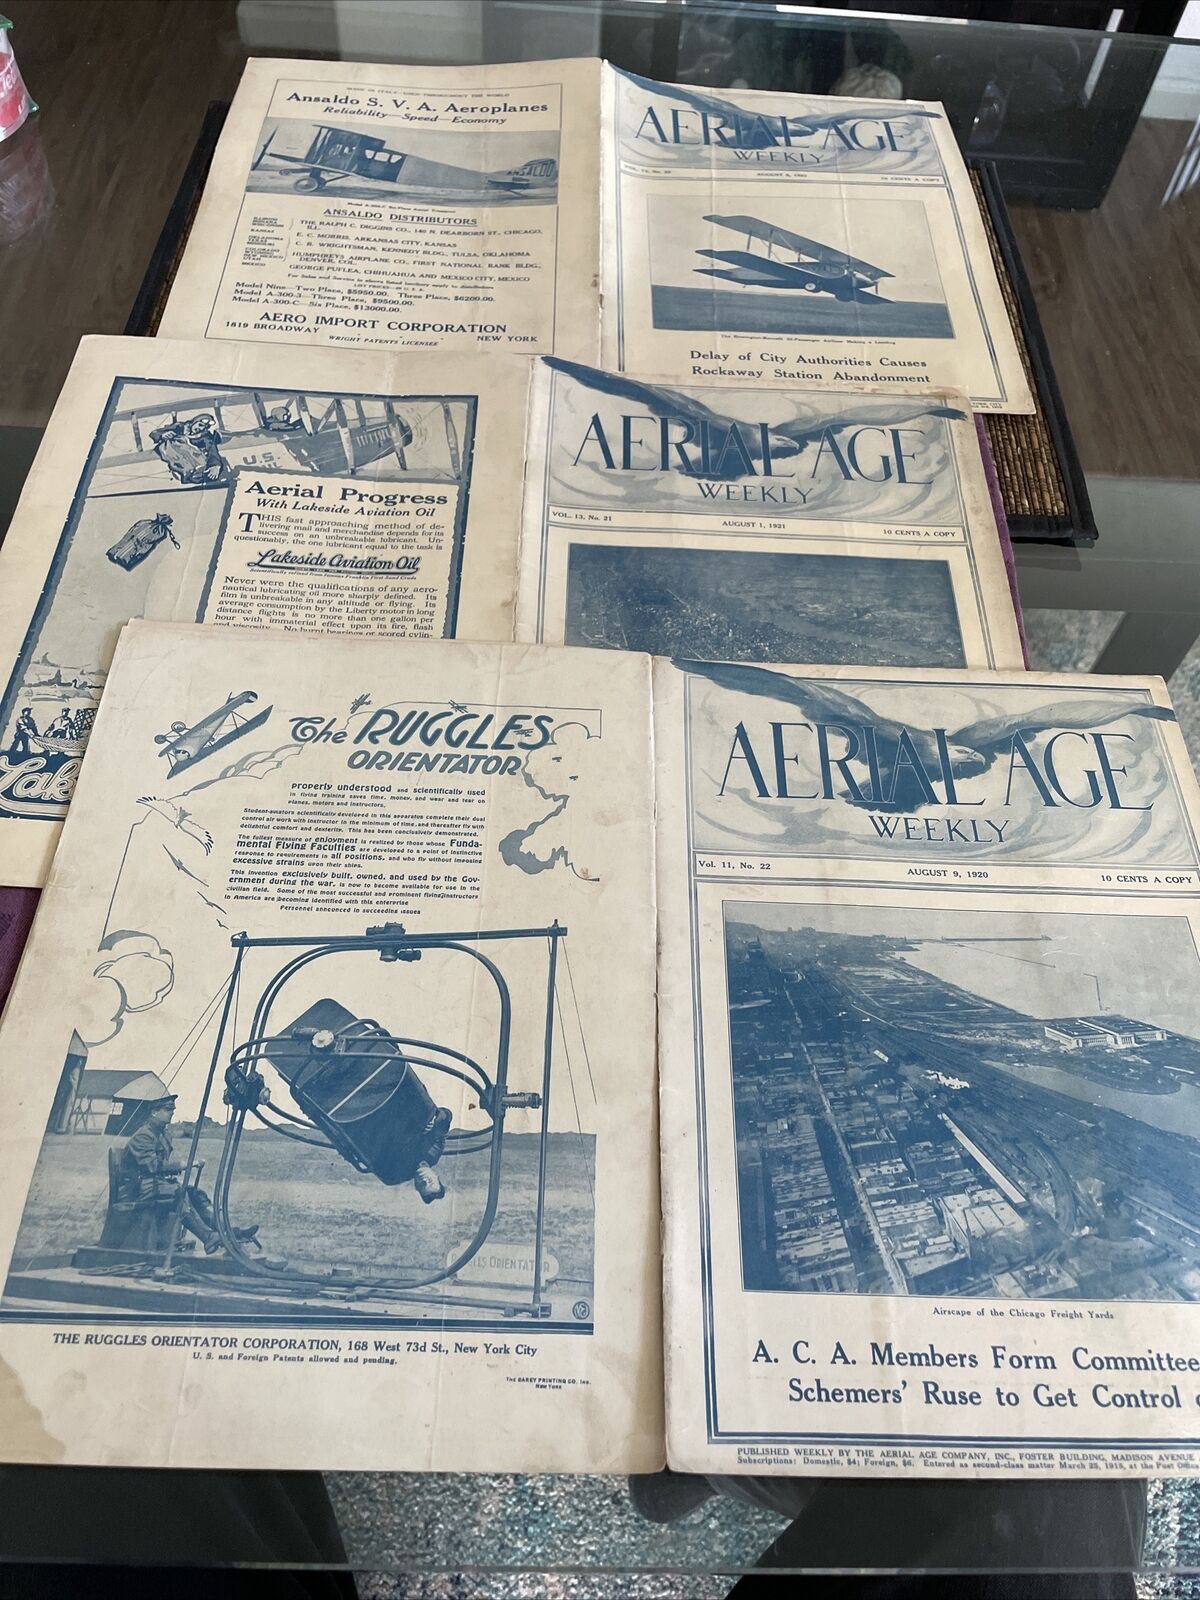 Aerial Age Weekly 1920/21 21 magazines lot of 3